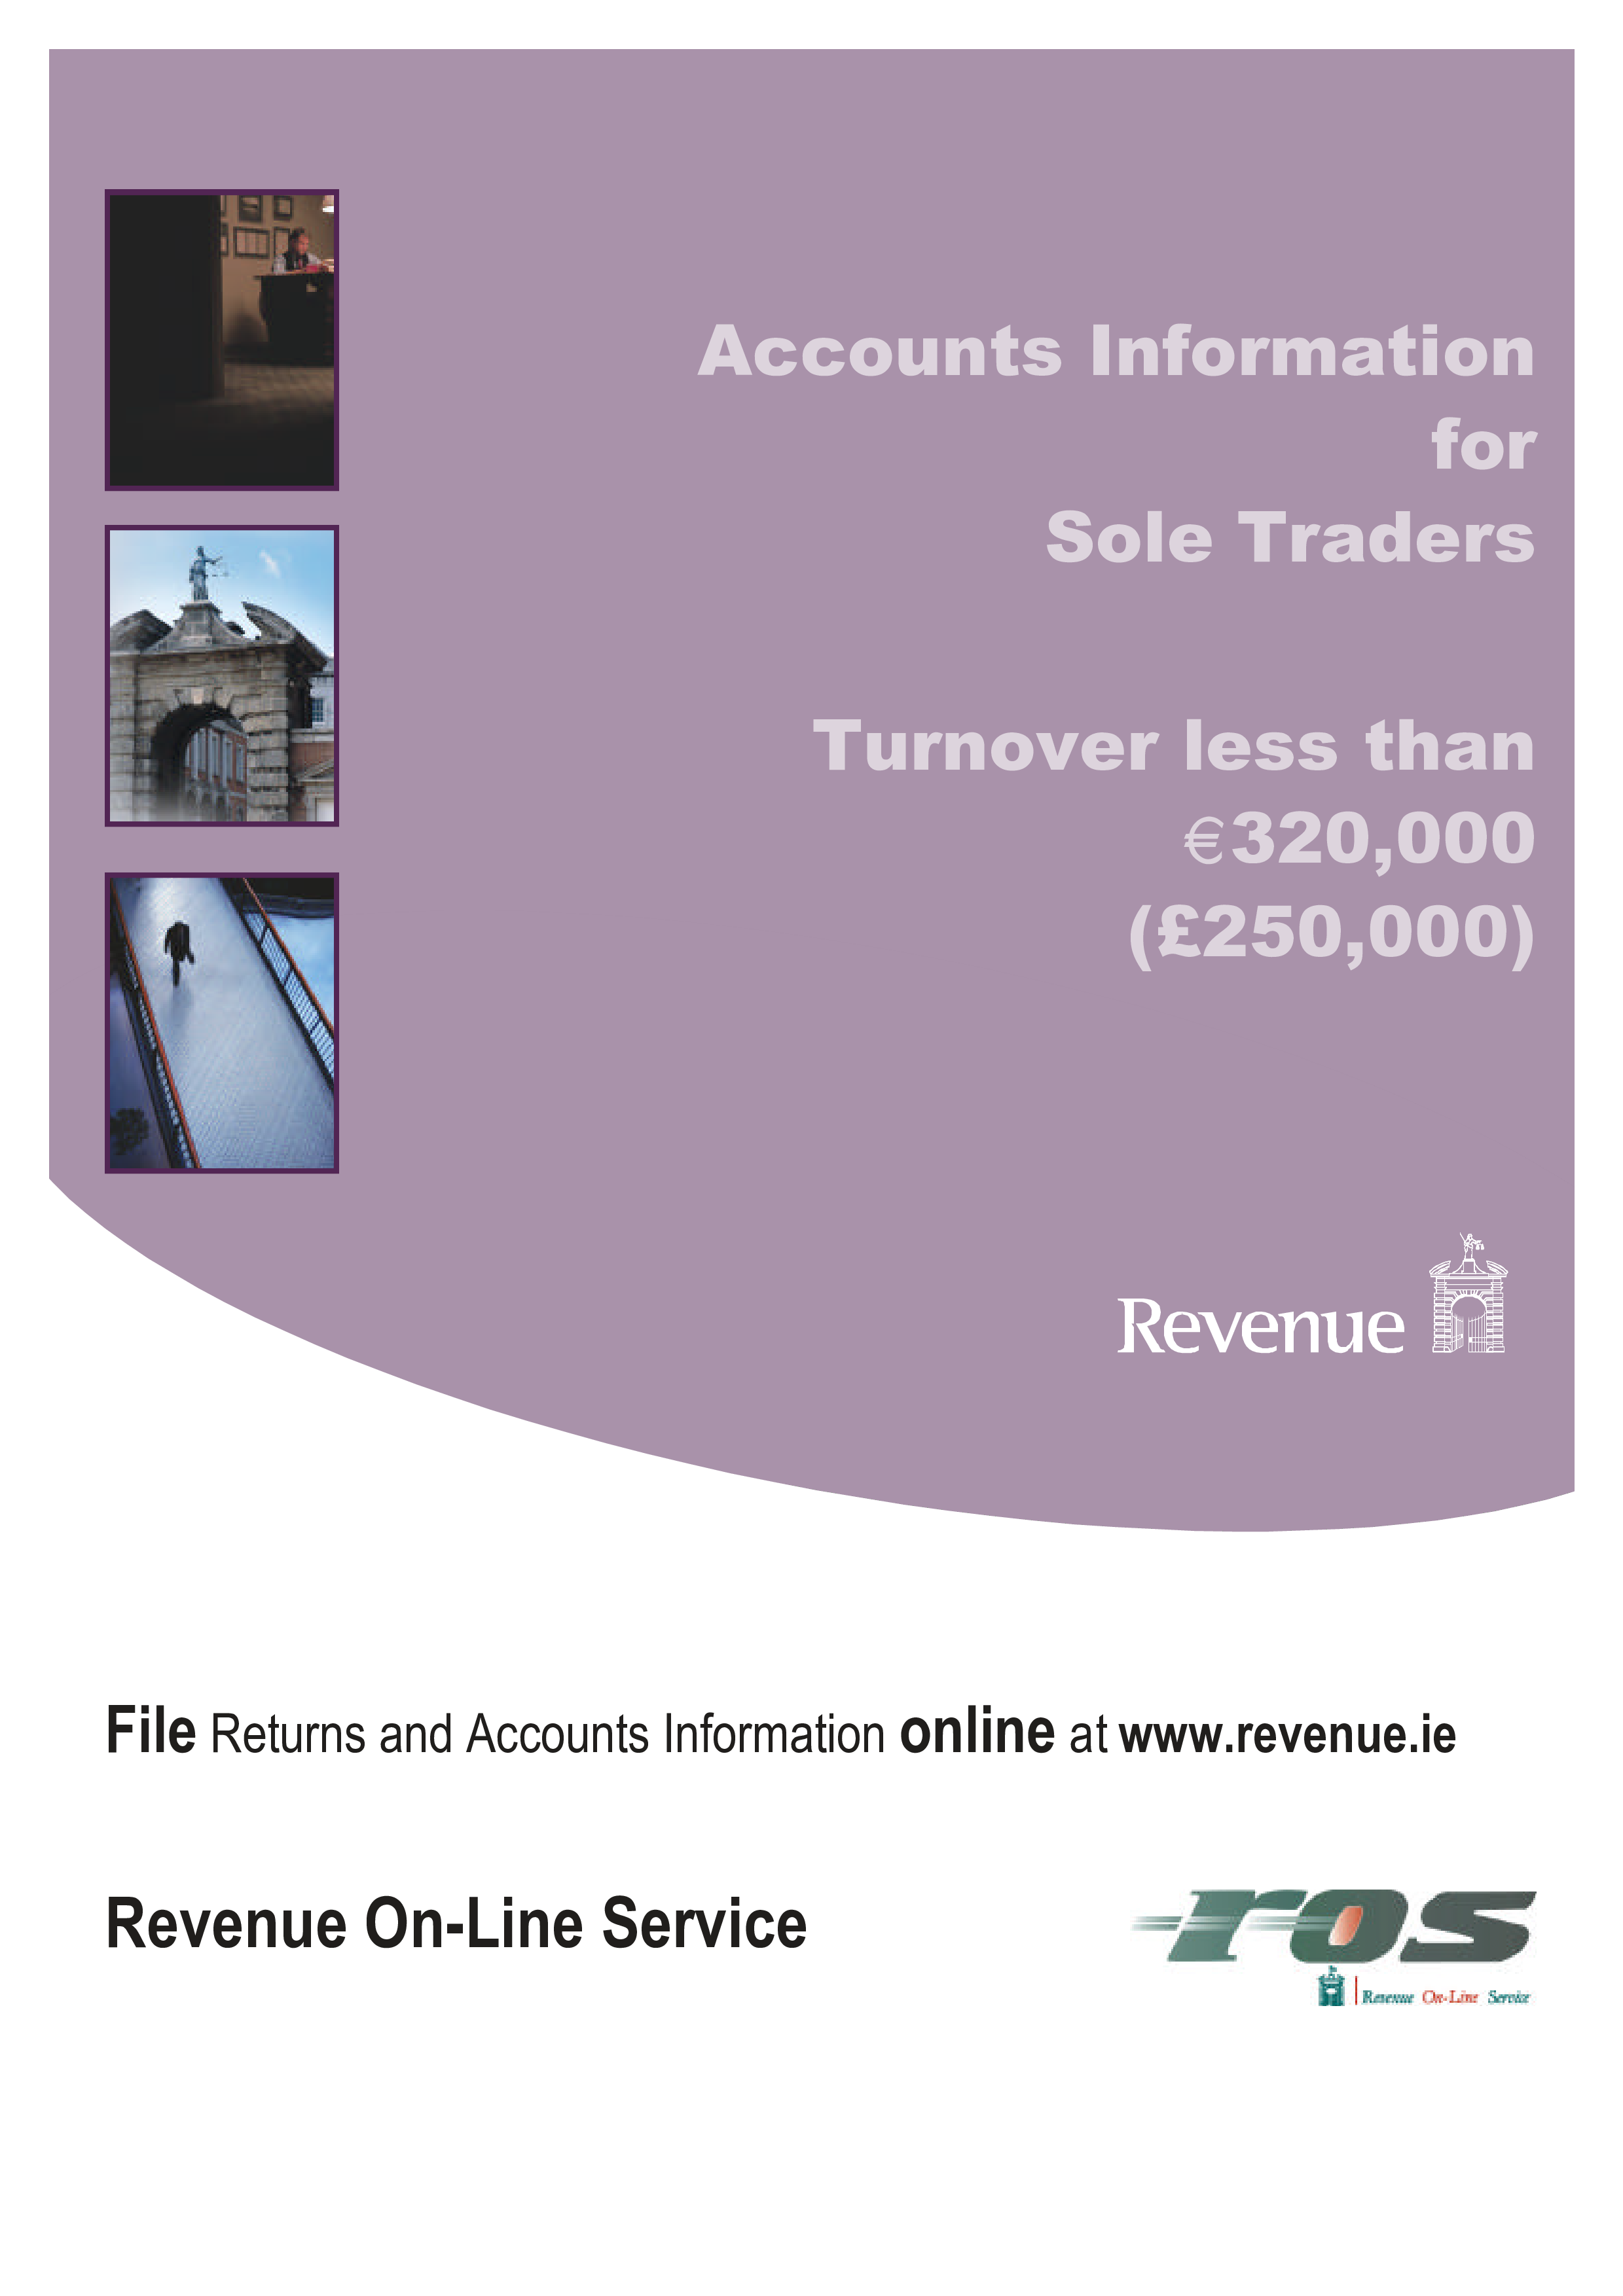 stam 1 - accounts information for sole traders turnover less than £320,000 (£250,000) template